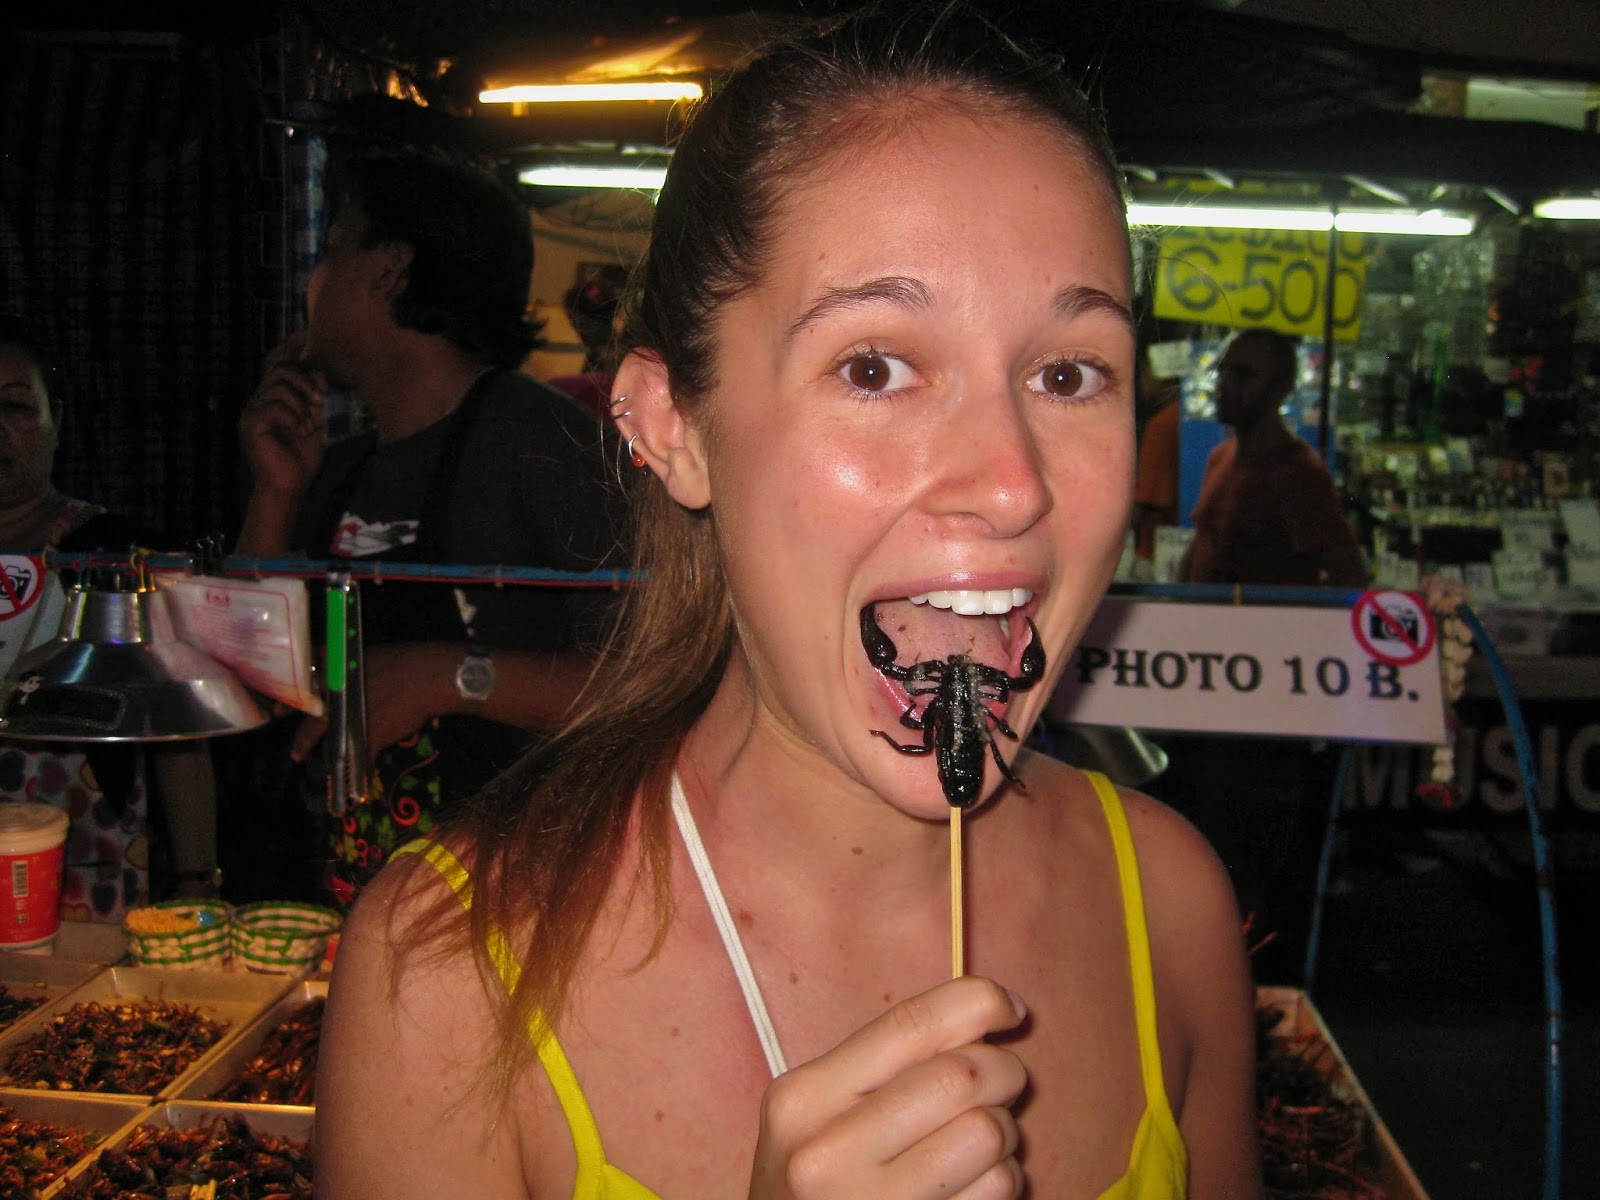 Me eating a fried scorpion in Bangkok, Thailand.